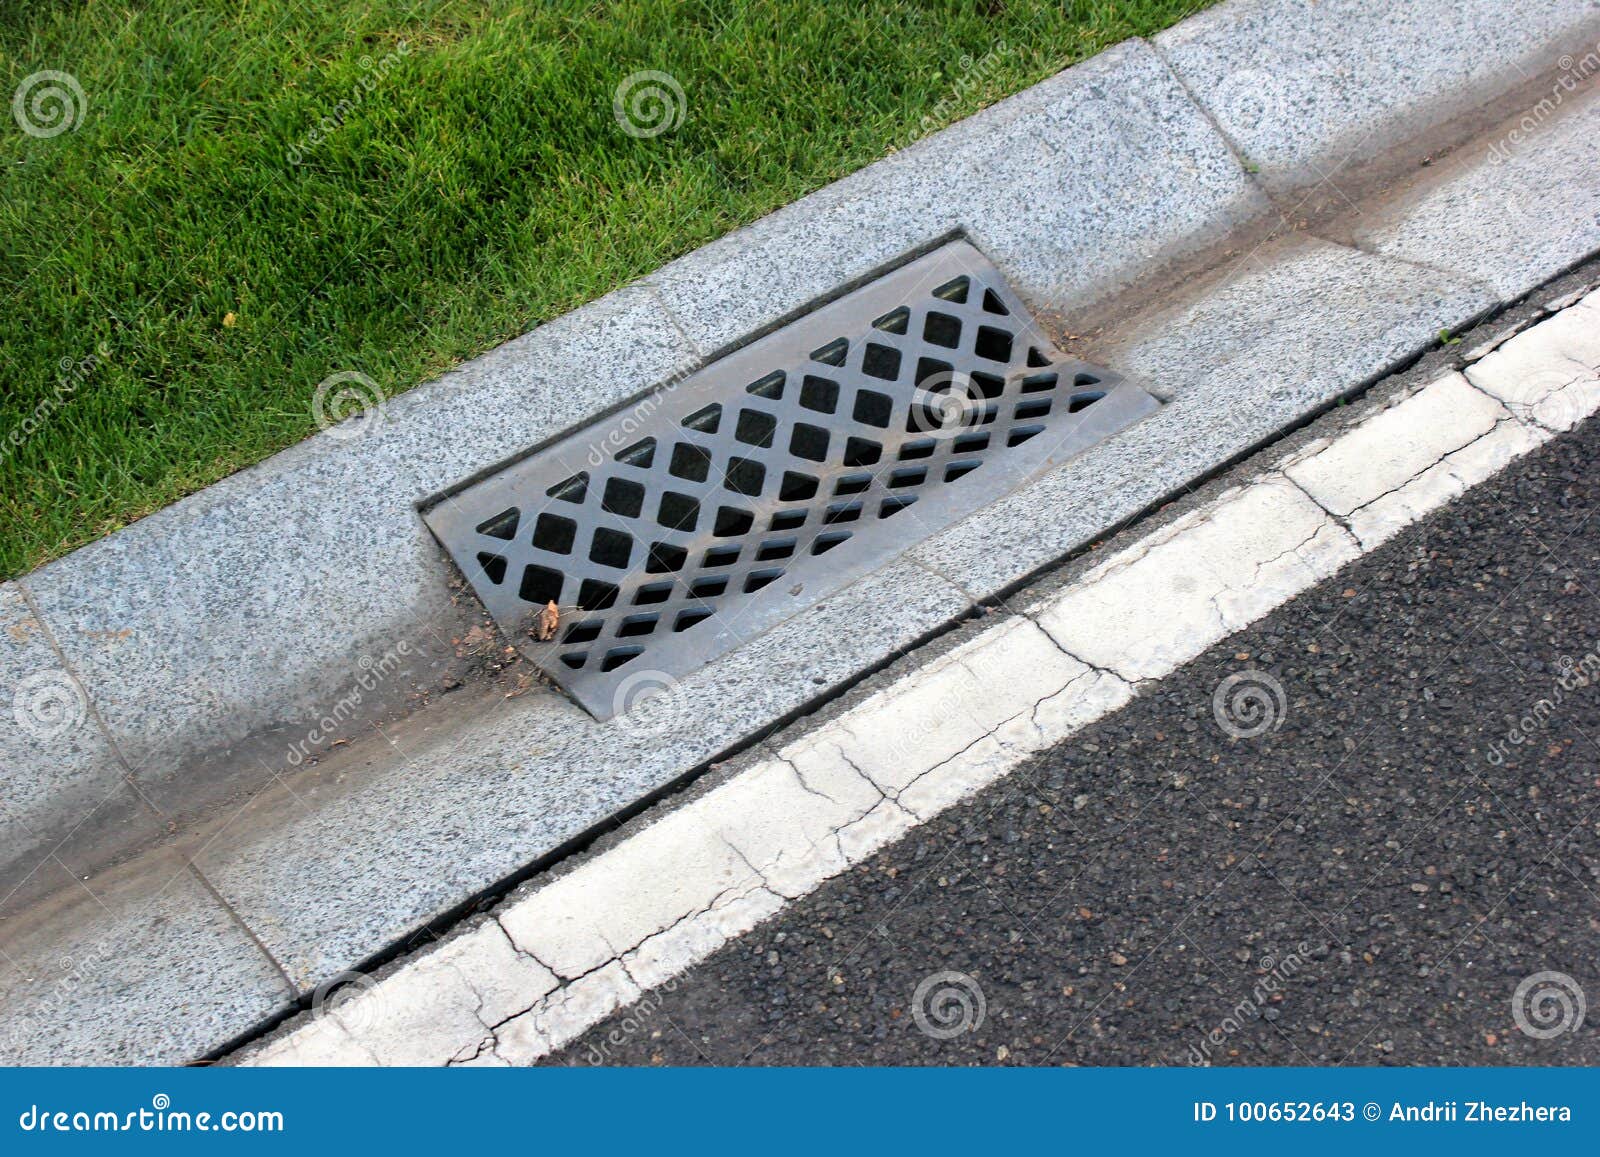 Street Gutter Of A Stormwater Drainage System Stock Image Image of culvert, background 100652643